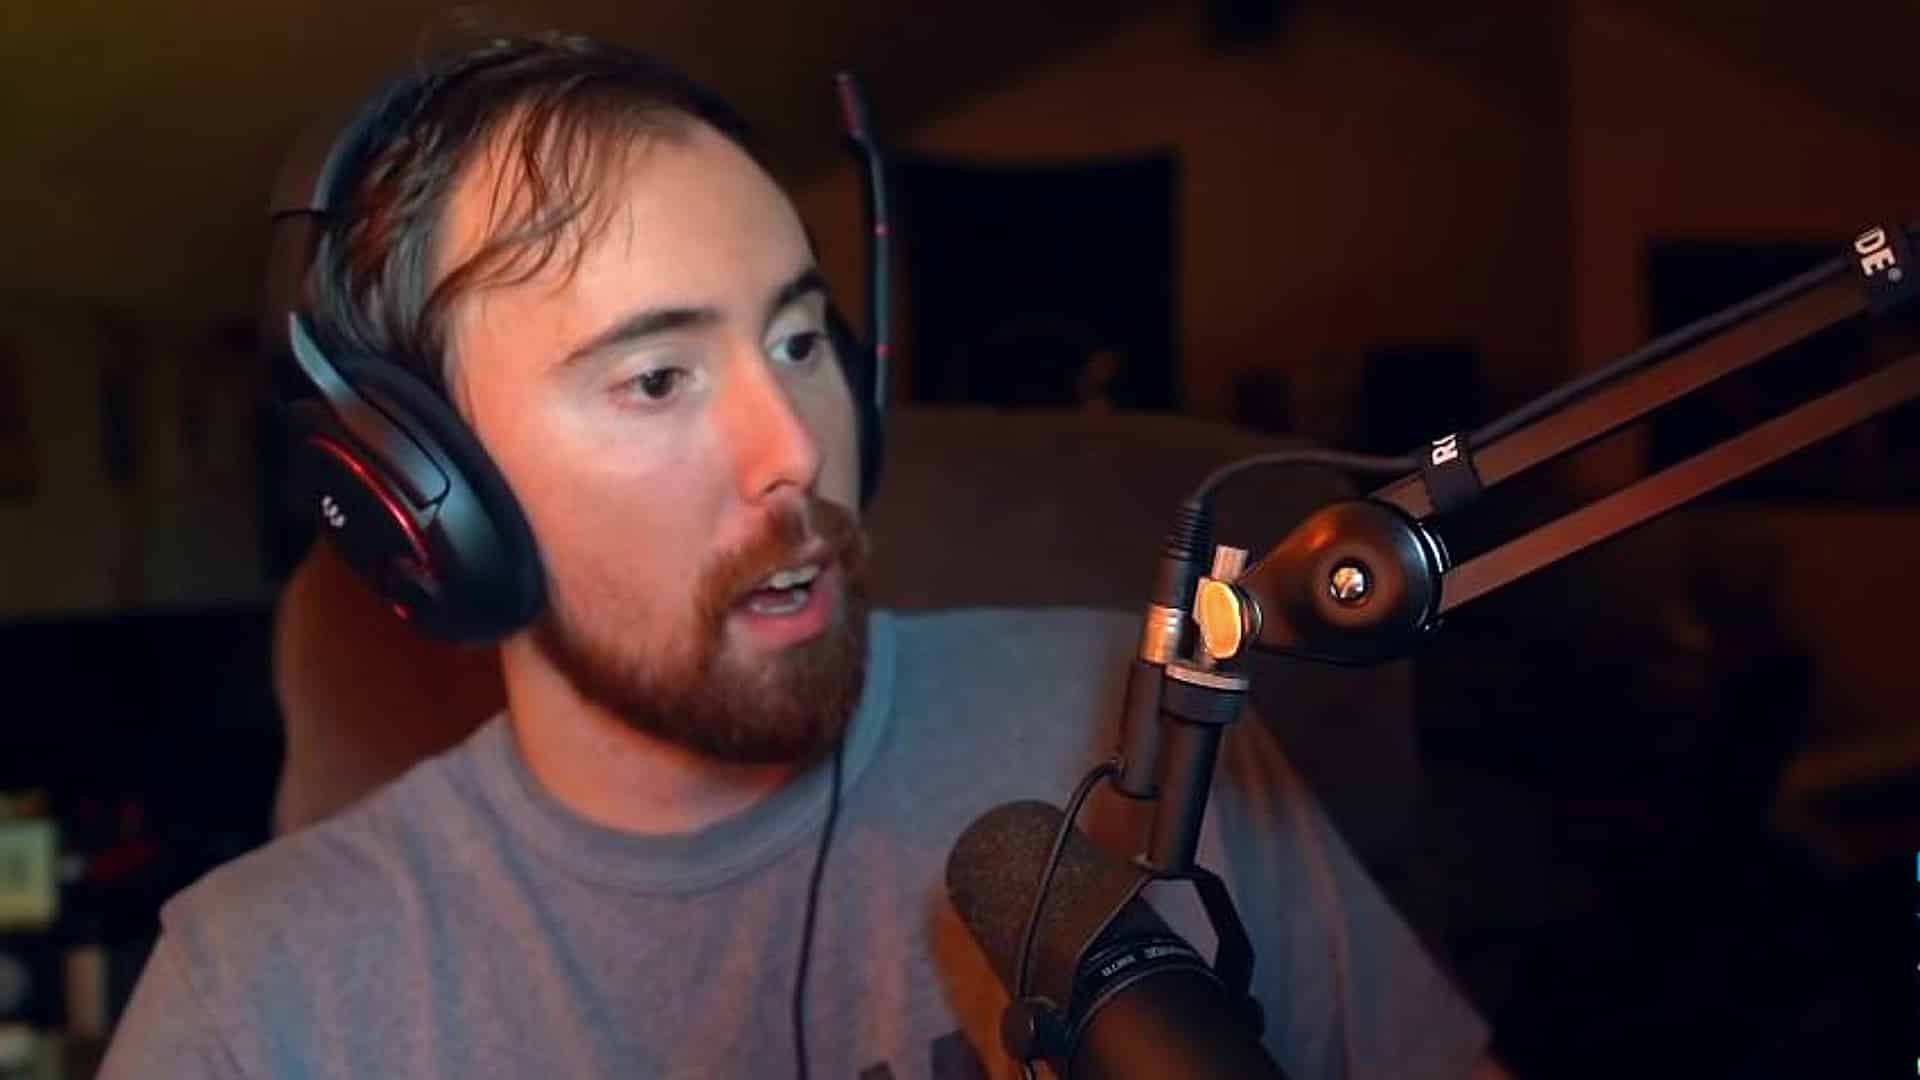 Asmongold stares off to the side on Twitch stream.